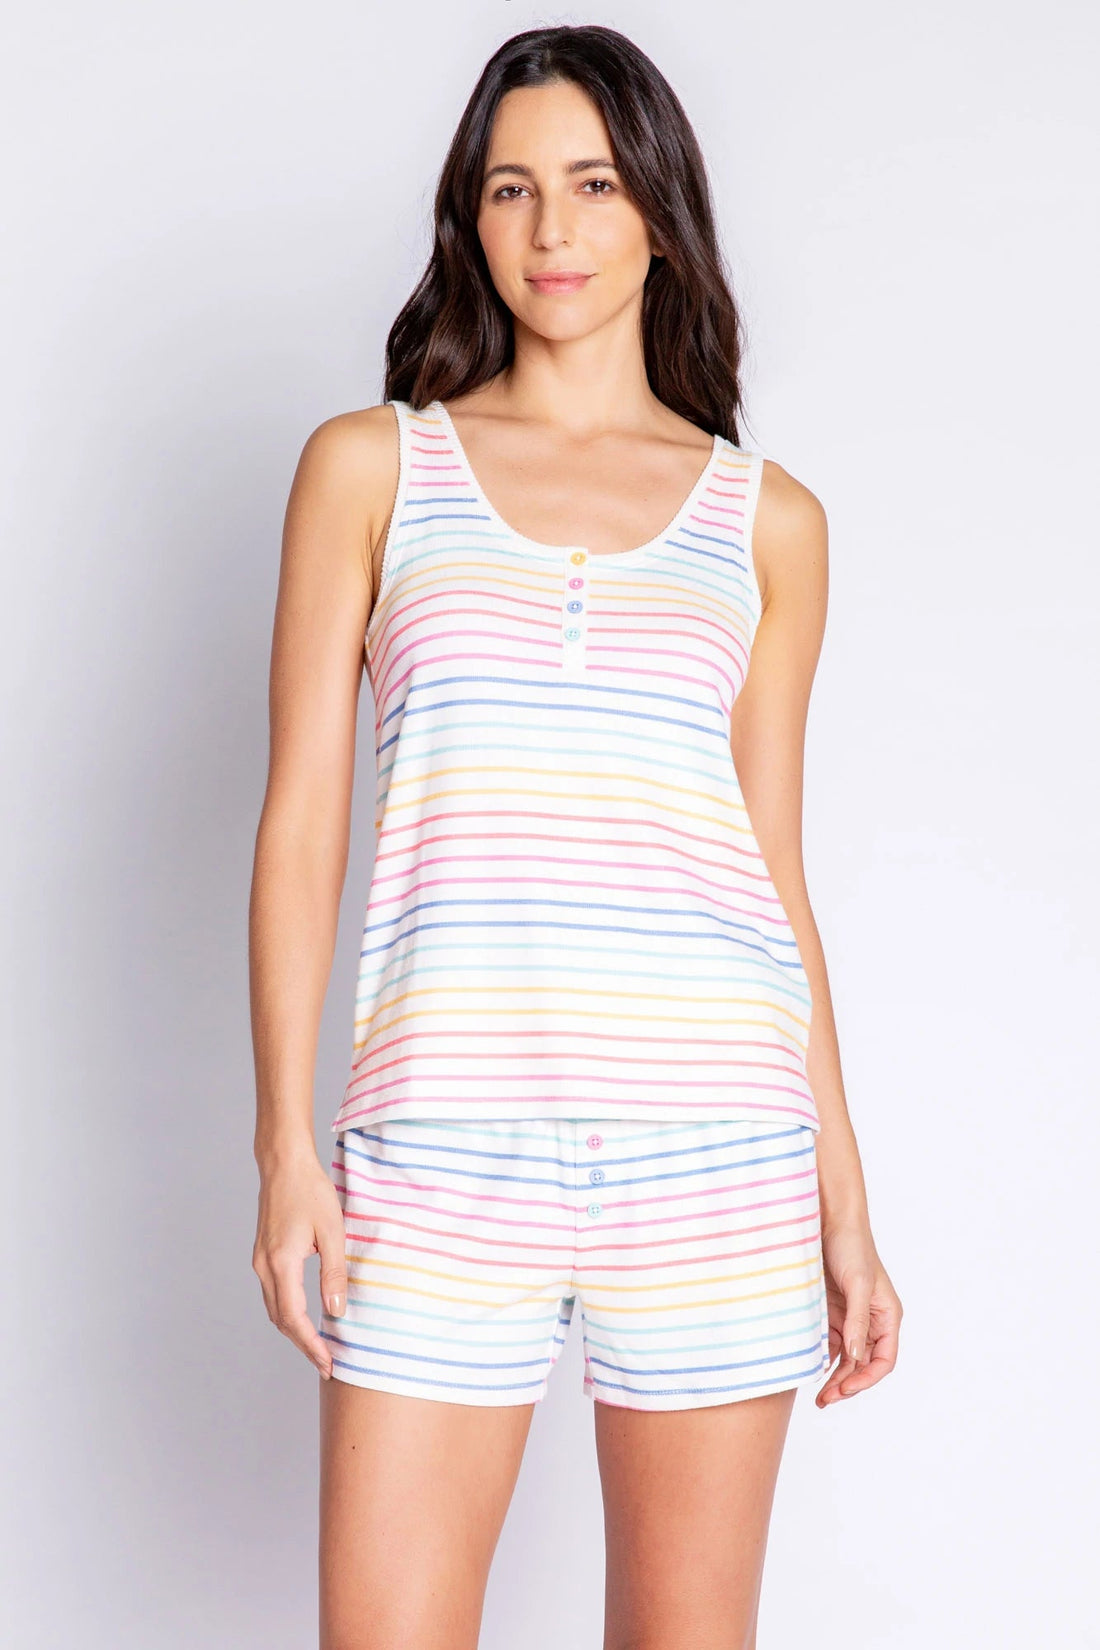 Buy PJ Salvage Button Up Babe Striped Tank Top at Spoiled Brat  Online - UK online Fashion &amp; lifestyle boutique